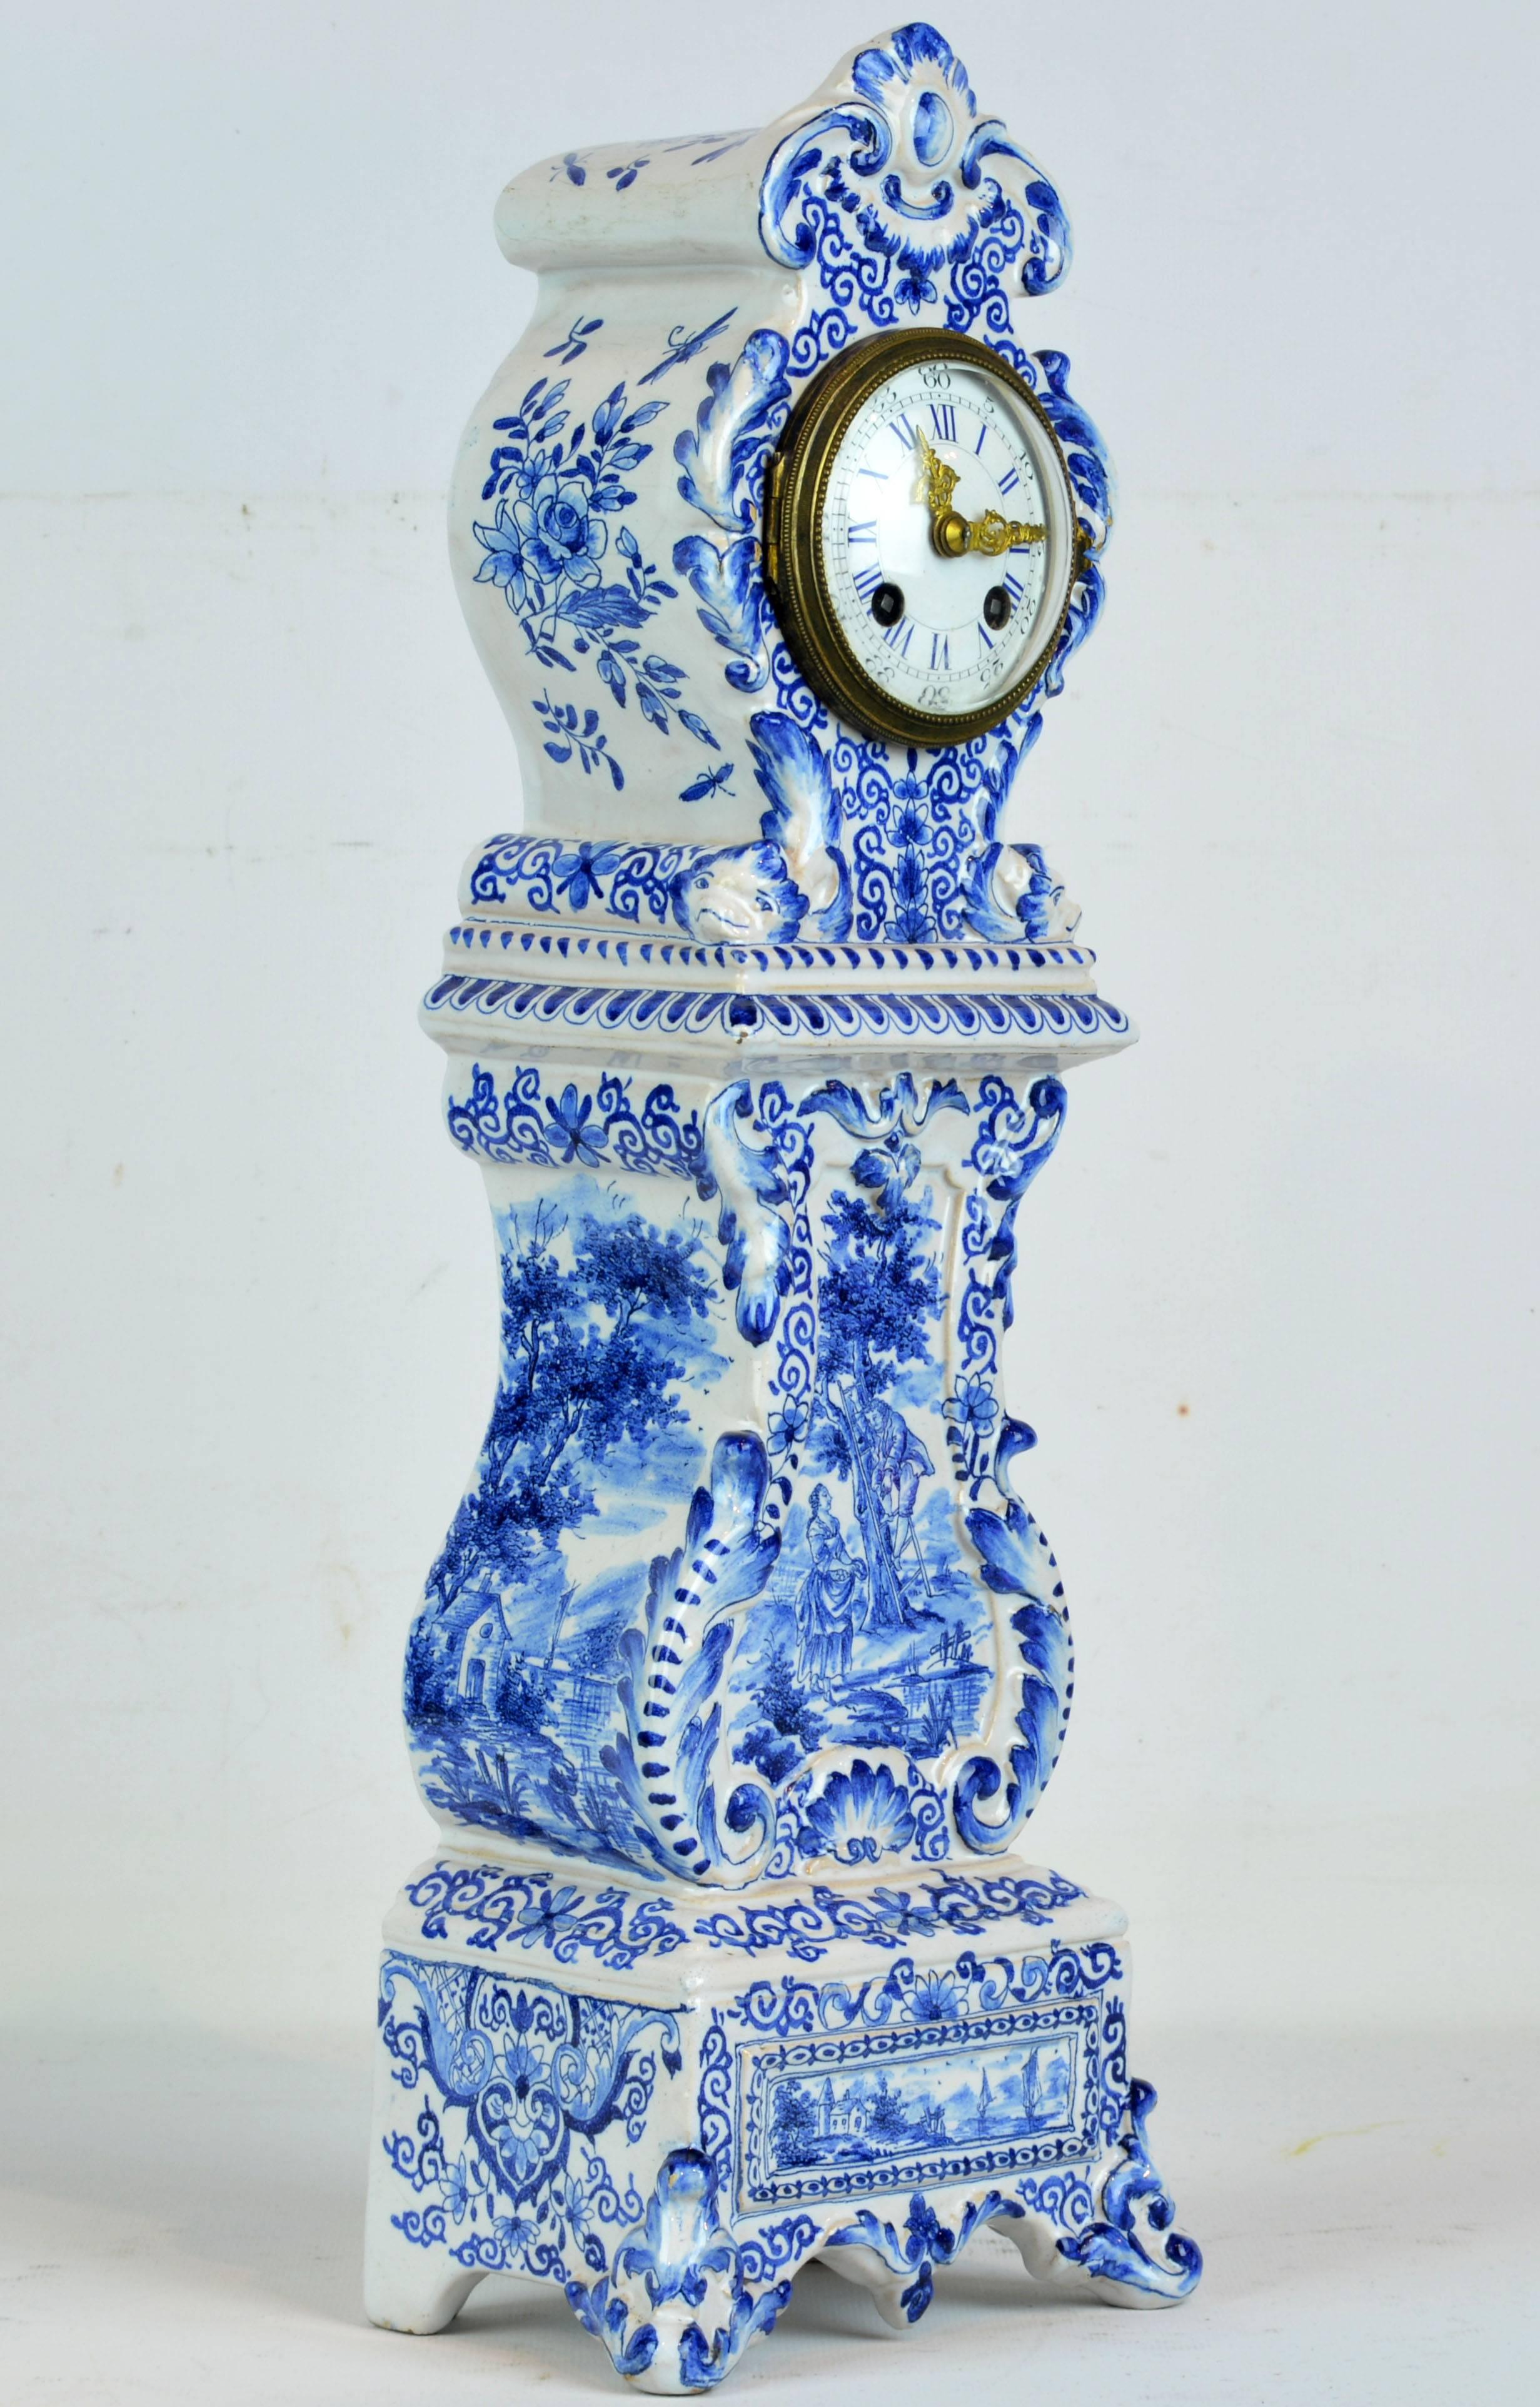 Standing about 18 inches tall this diminutive tall clock in the Rococo style features blue under-glaze decorations representing landscape motifs, scrolled leaf-work and floral designs. The clock is marked 'Burks Fabrikat' and is in working order.